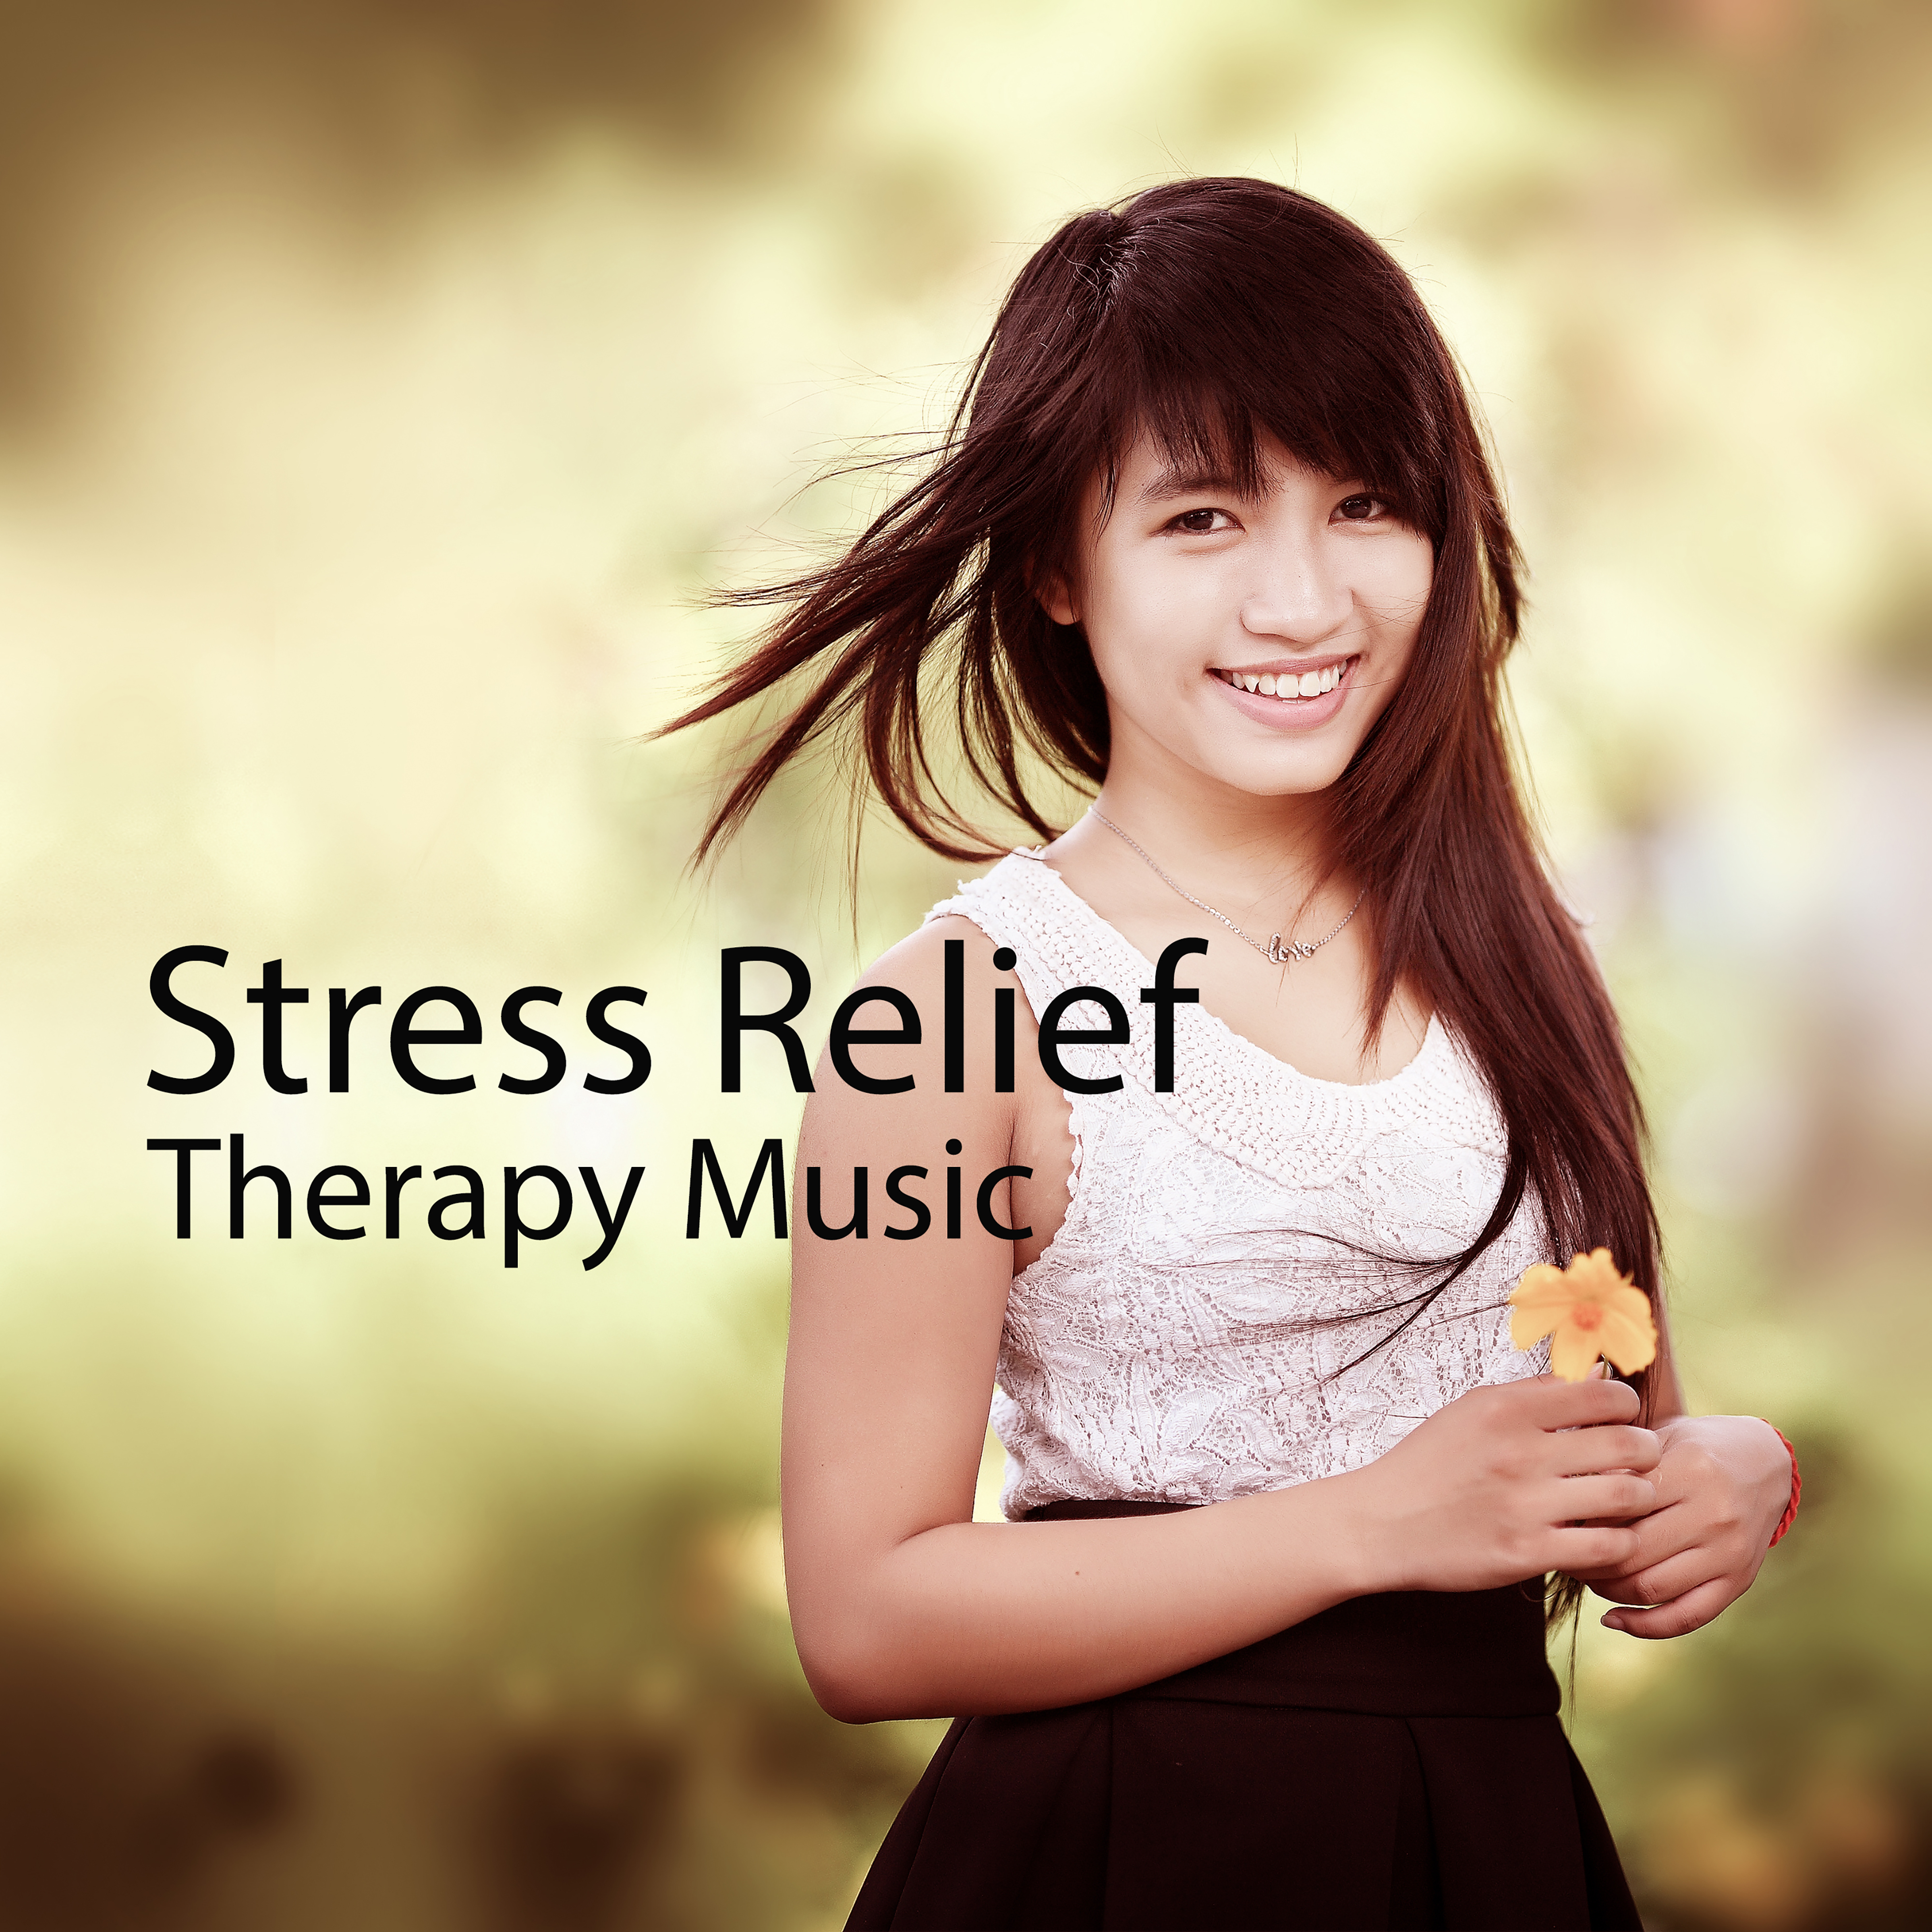 Stress Relief Therapy Music – Calming New Age Music, Relax, Rest, Healing Melodies